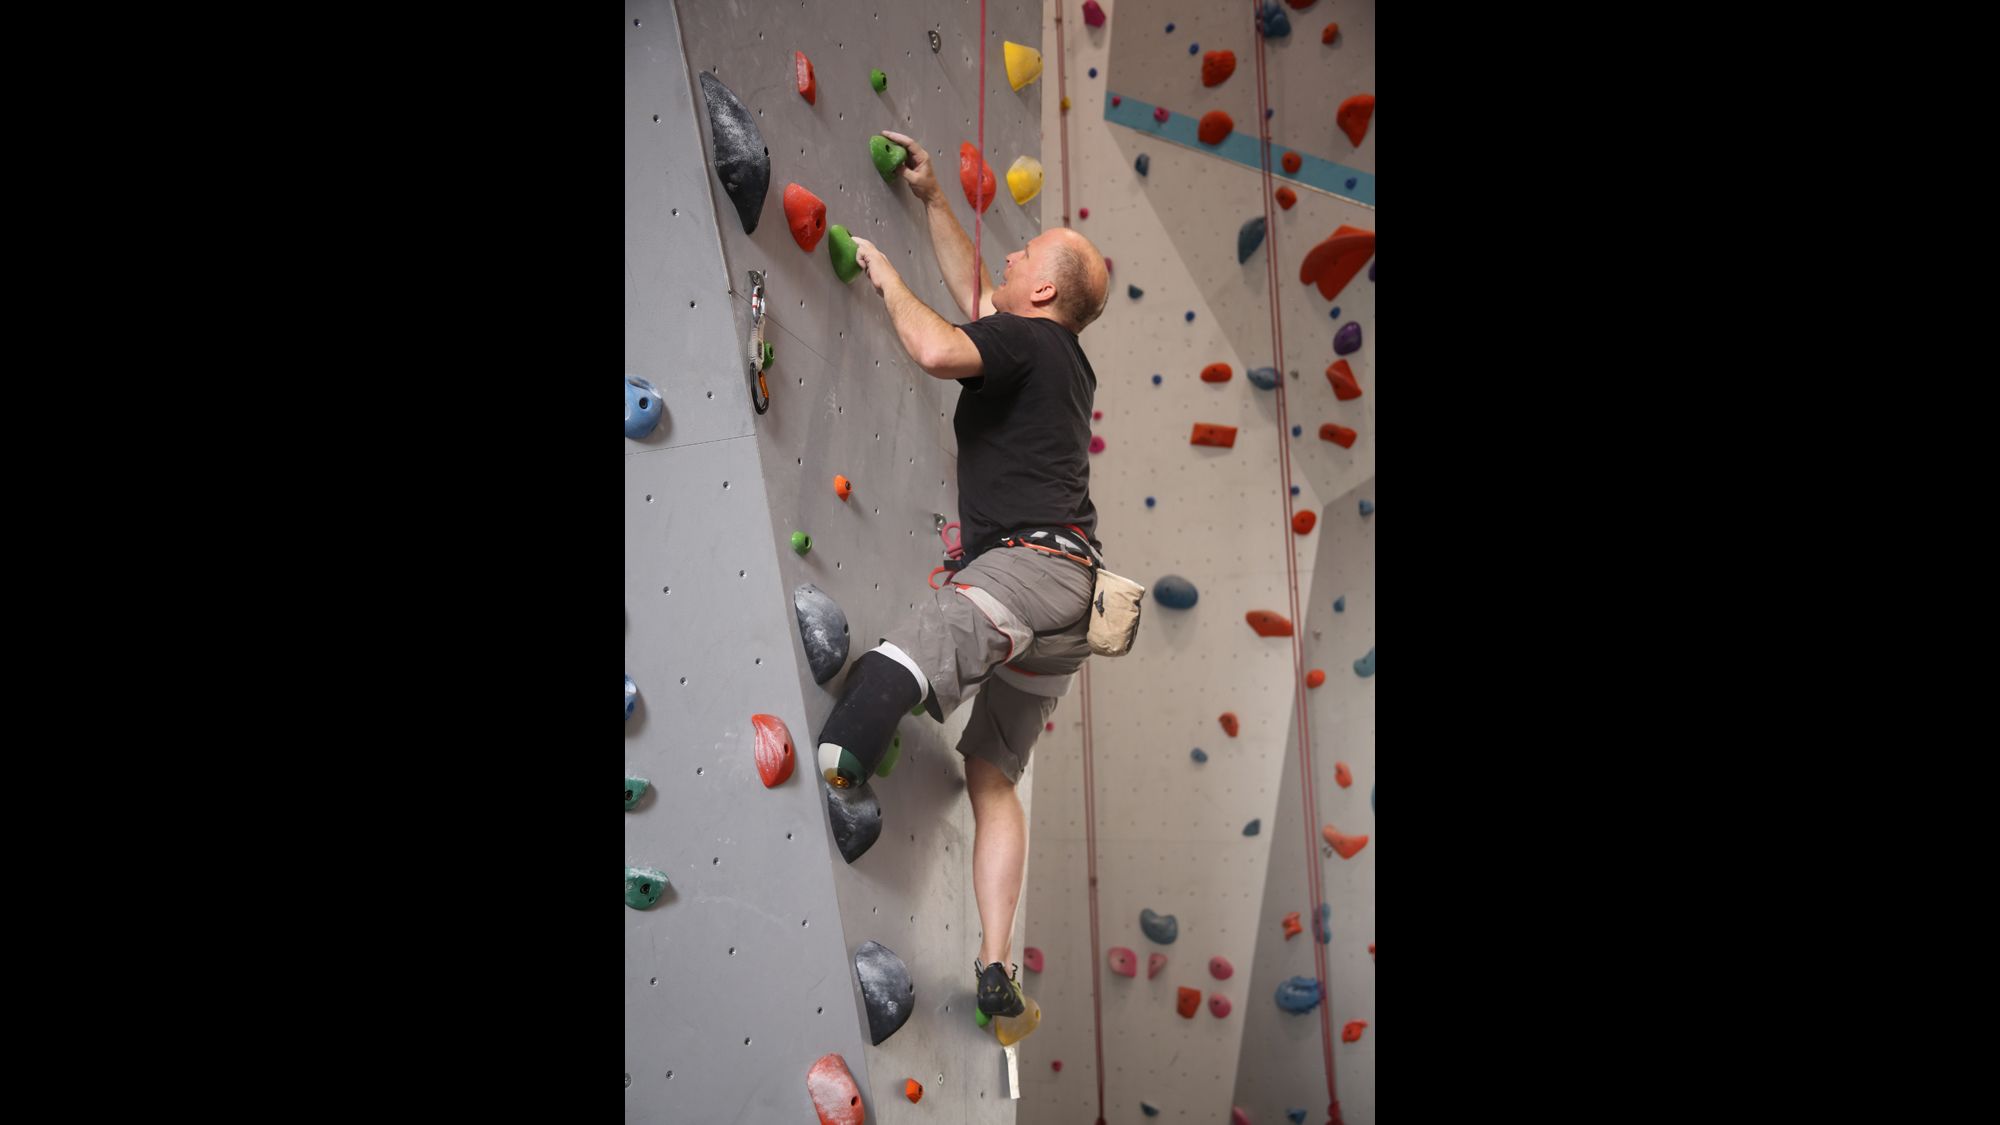 Climbing with an implantable port?